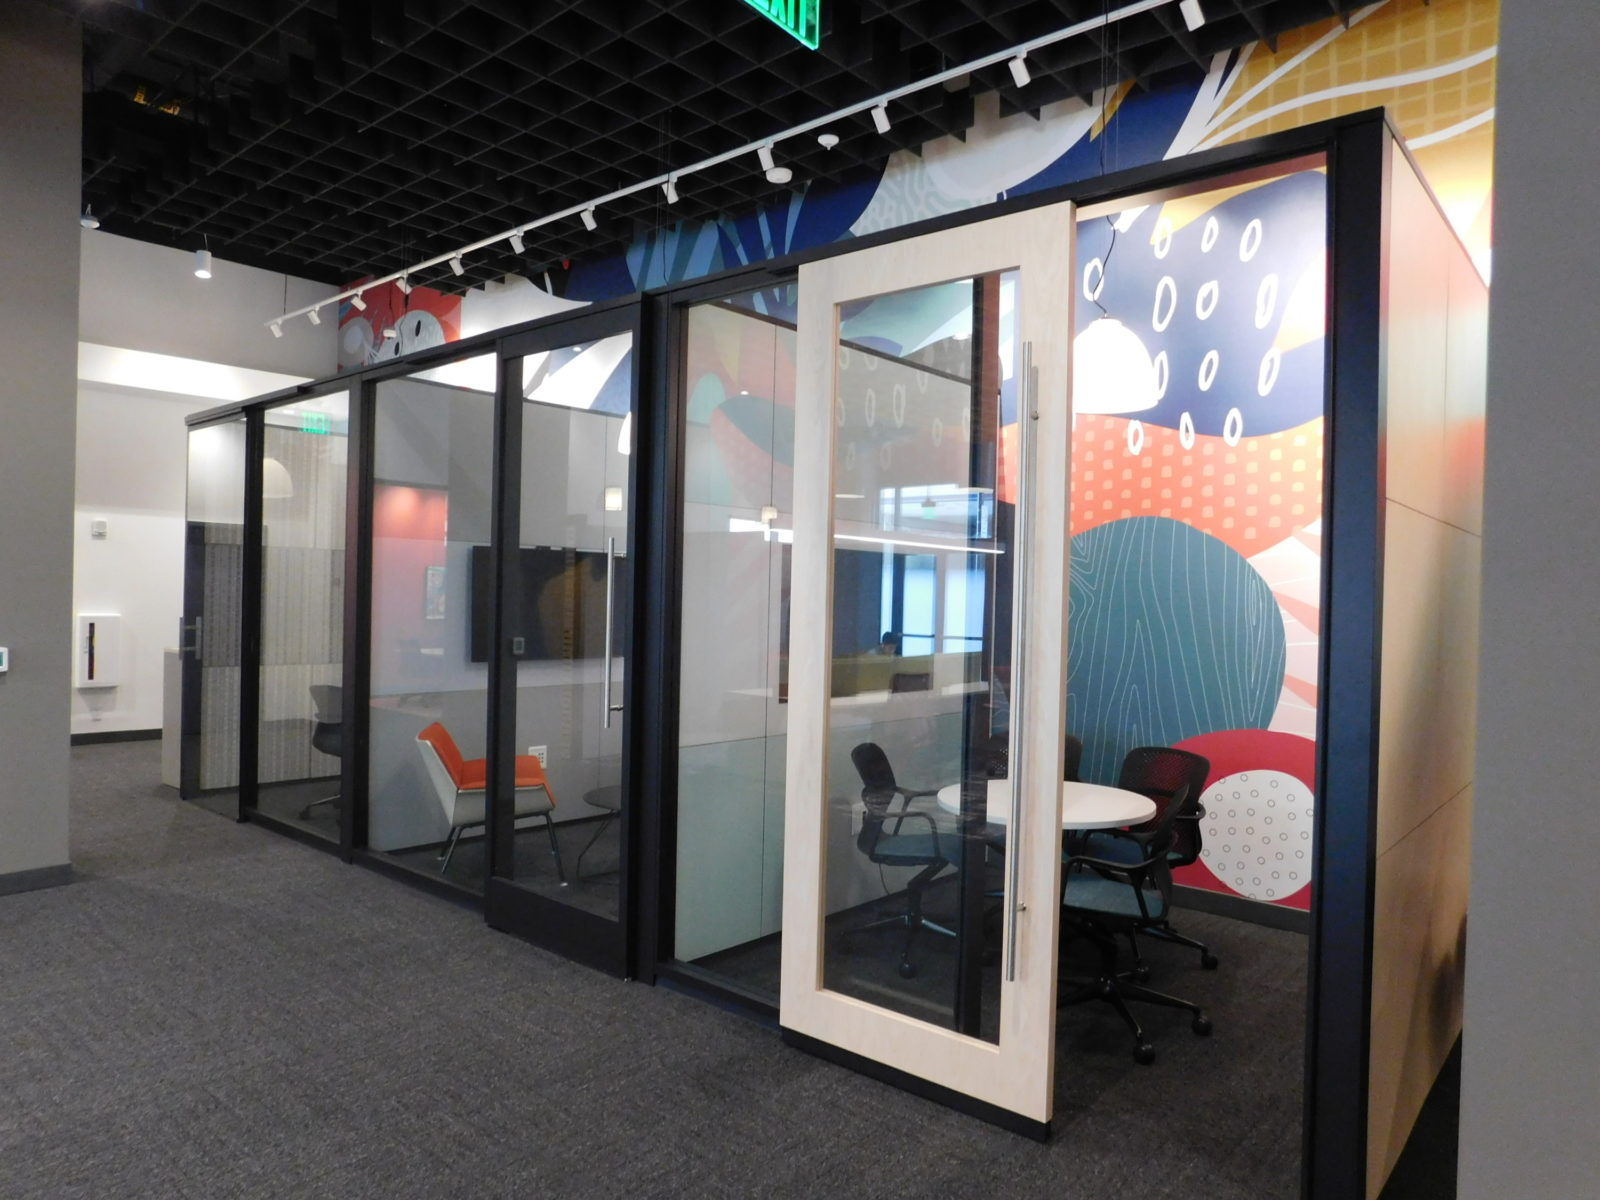 View of an entire row of DIRTT modular solution. 3 rooms of glass walls and doors with different collaborative settings in each room.